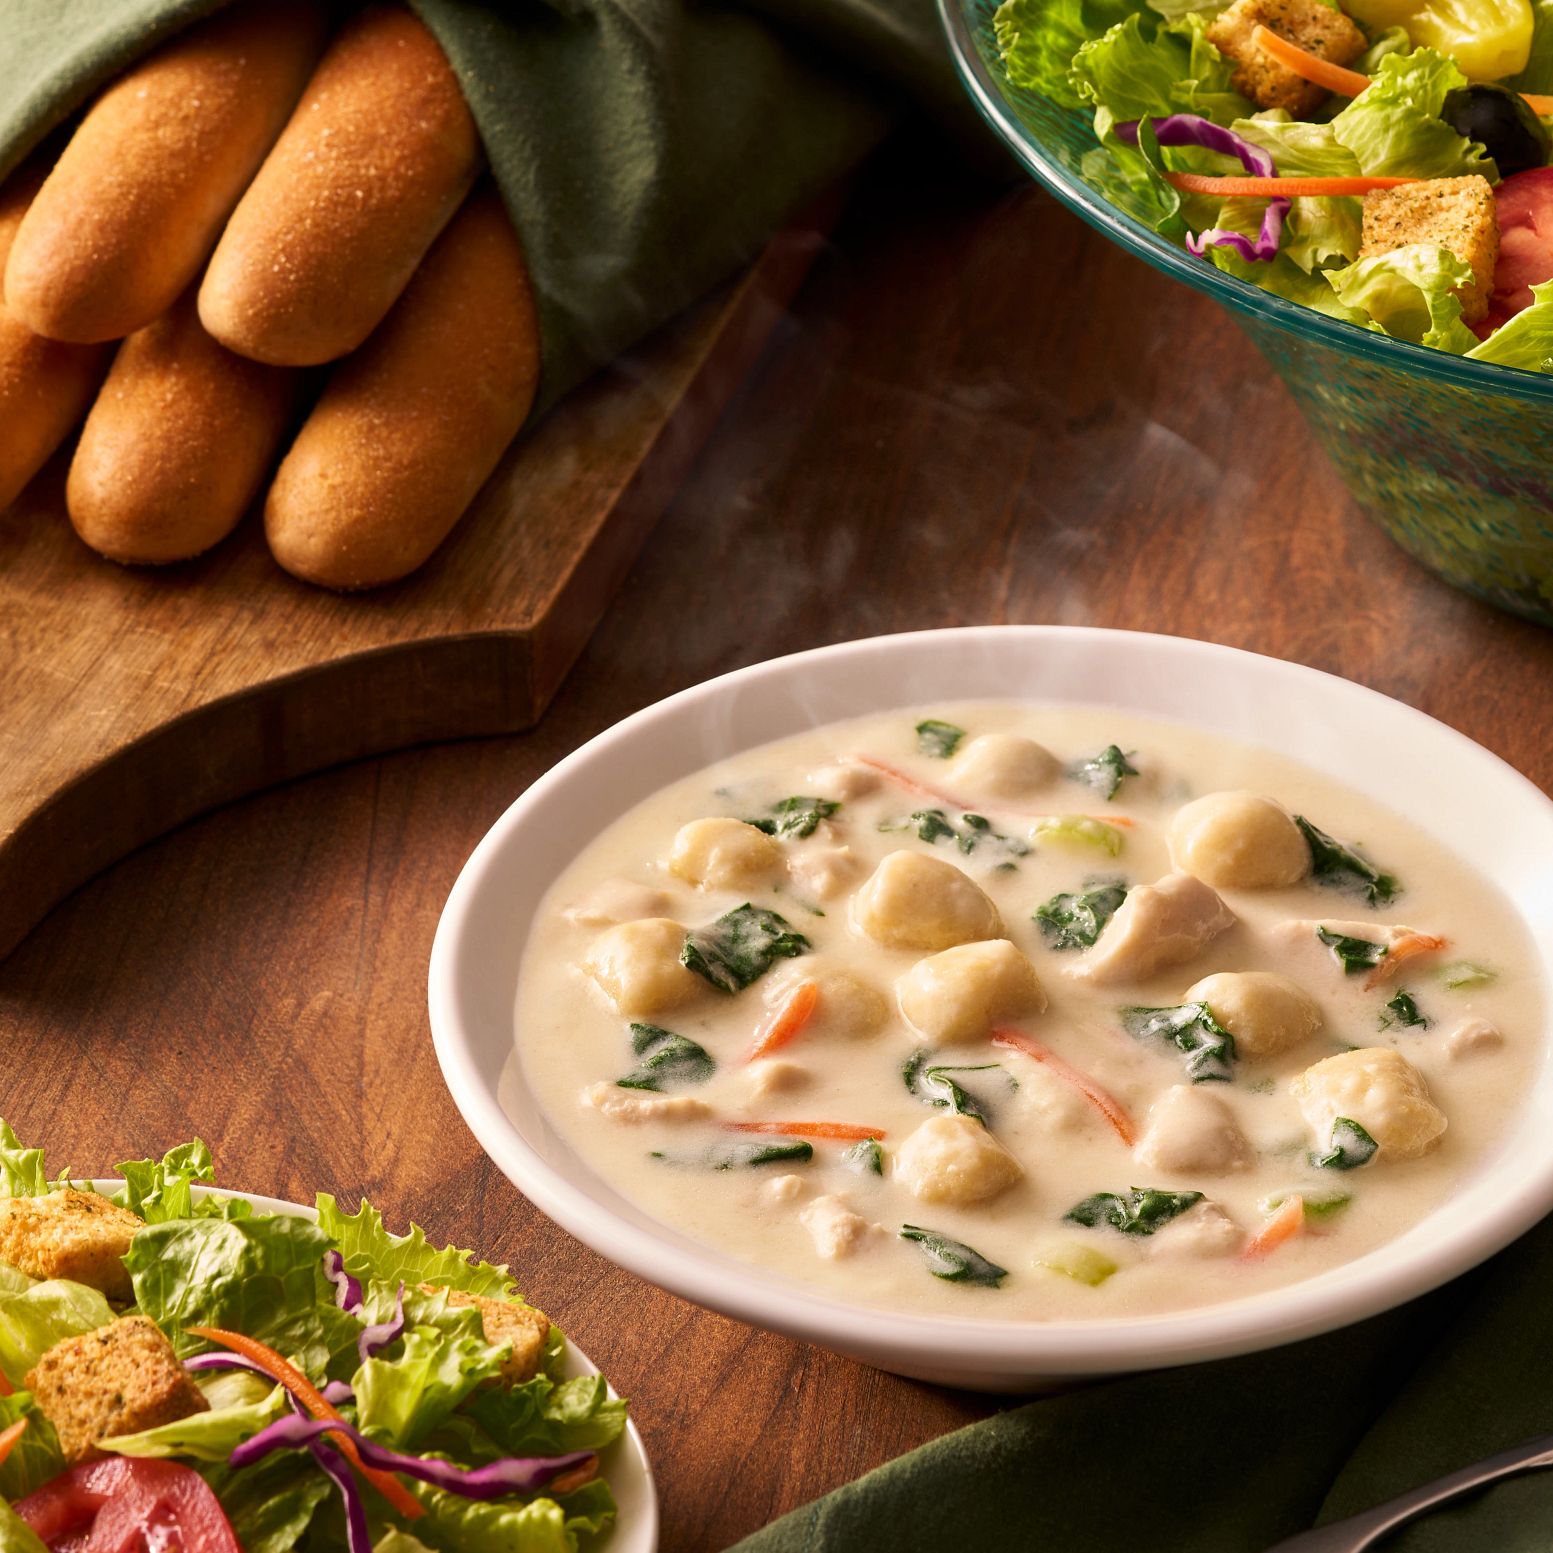 Chicken & Gnocchi: A creamy soup made with roasted chicken, Italian dumplings and spinach. Olive Garden Italian Restaurant Folsom (916)984-7036